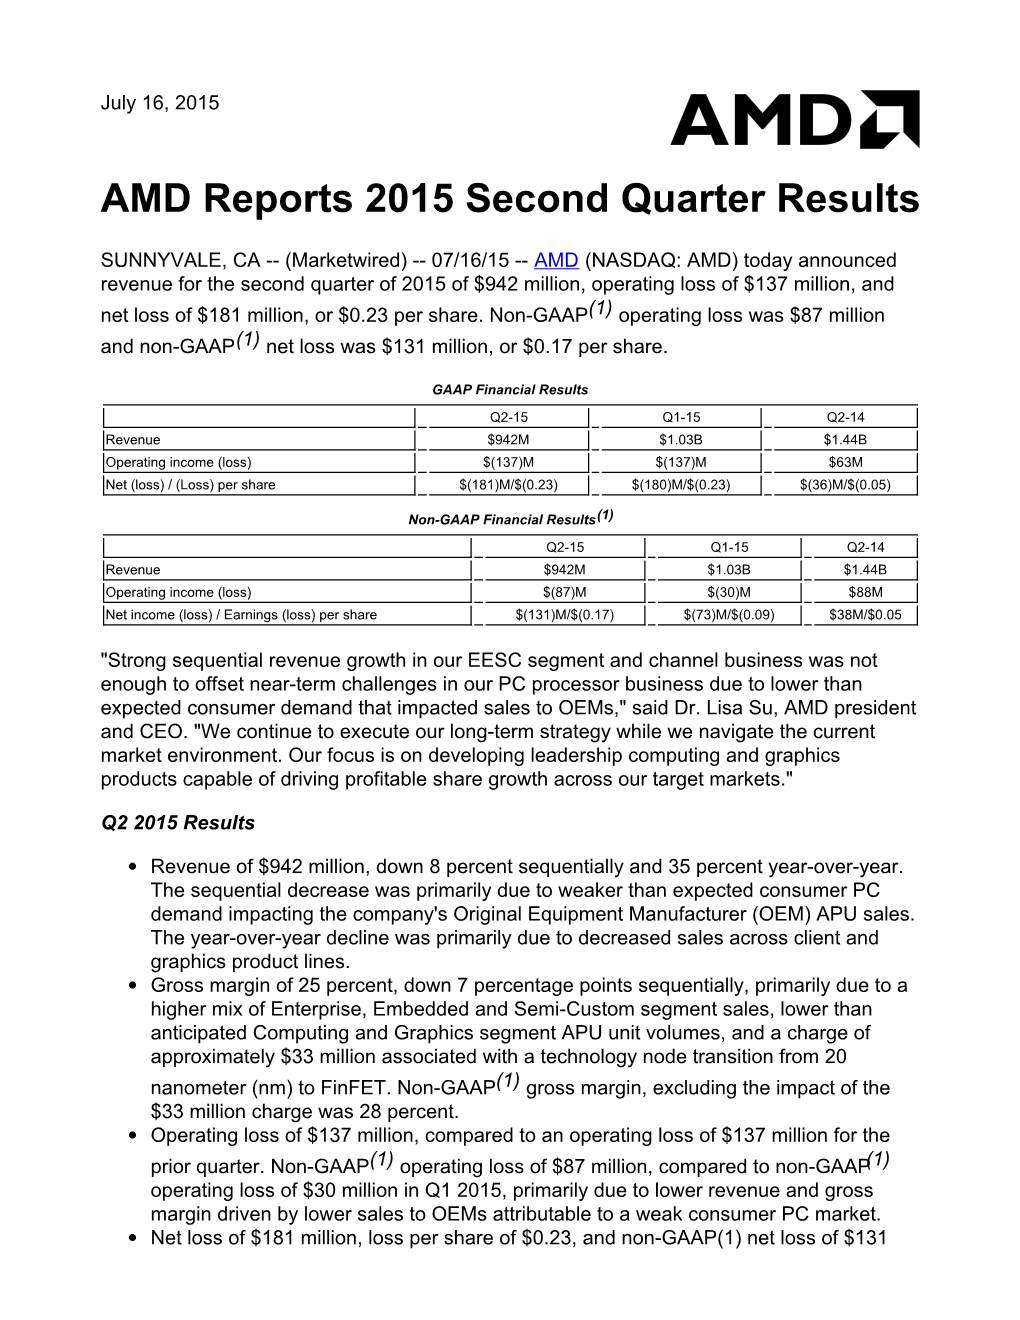 AMD Reports 2015 Second Quarter Results